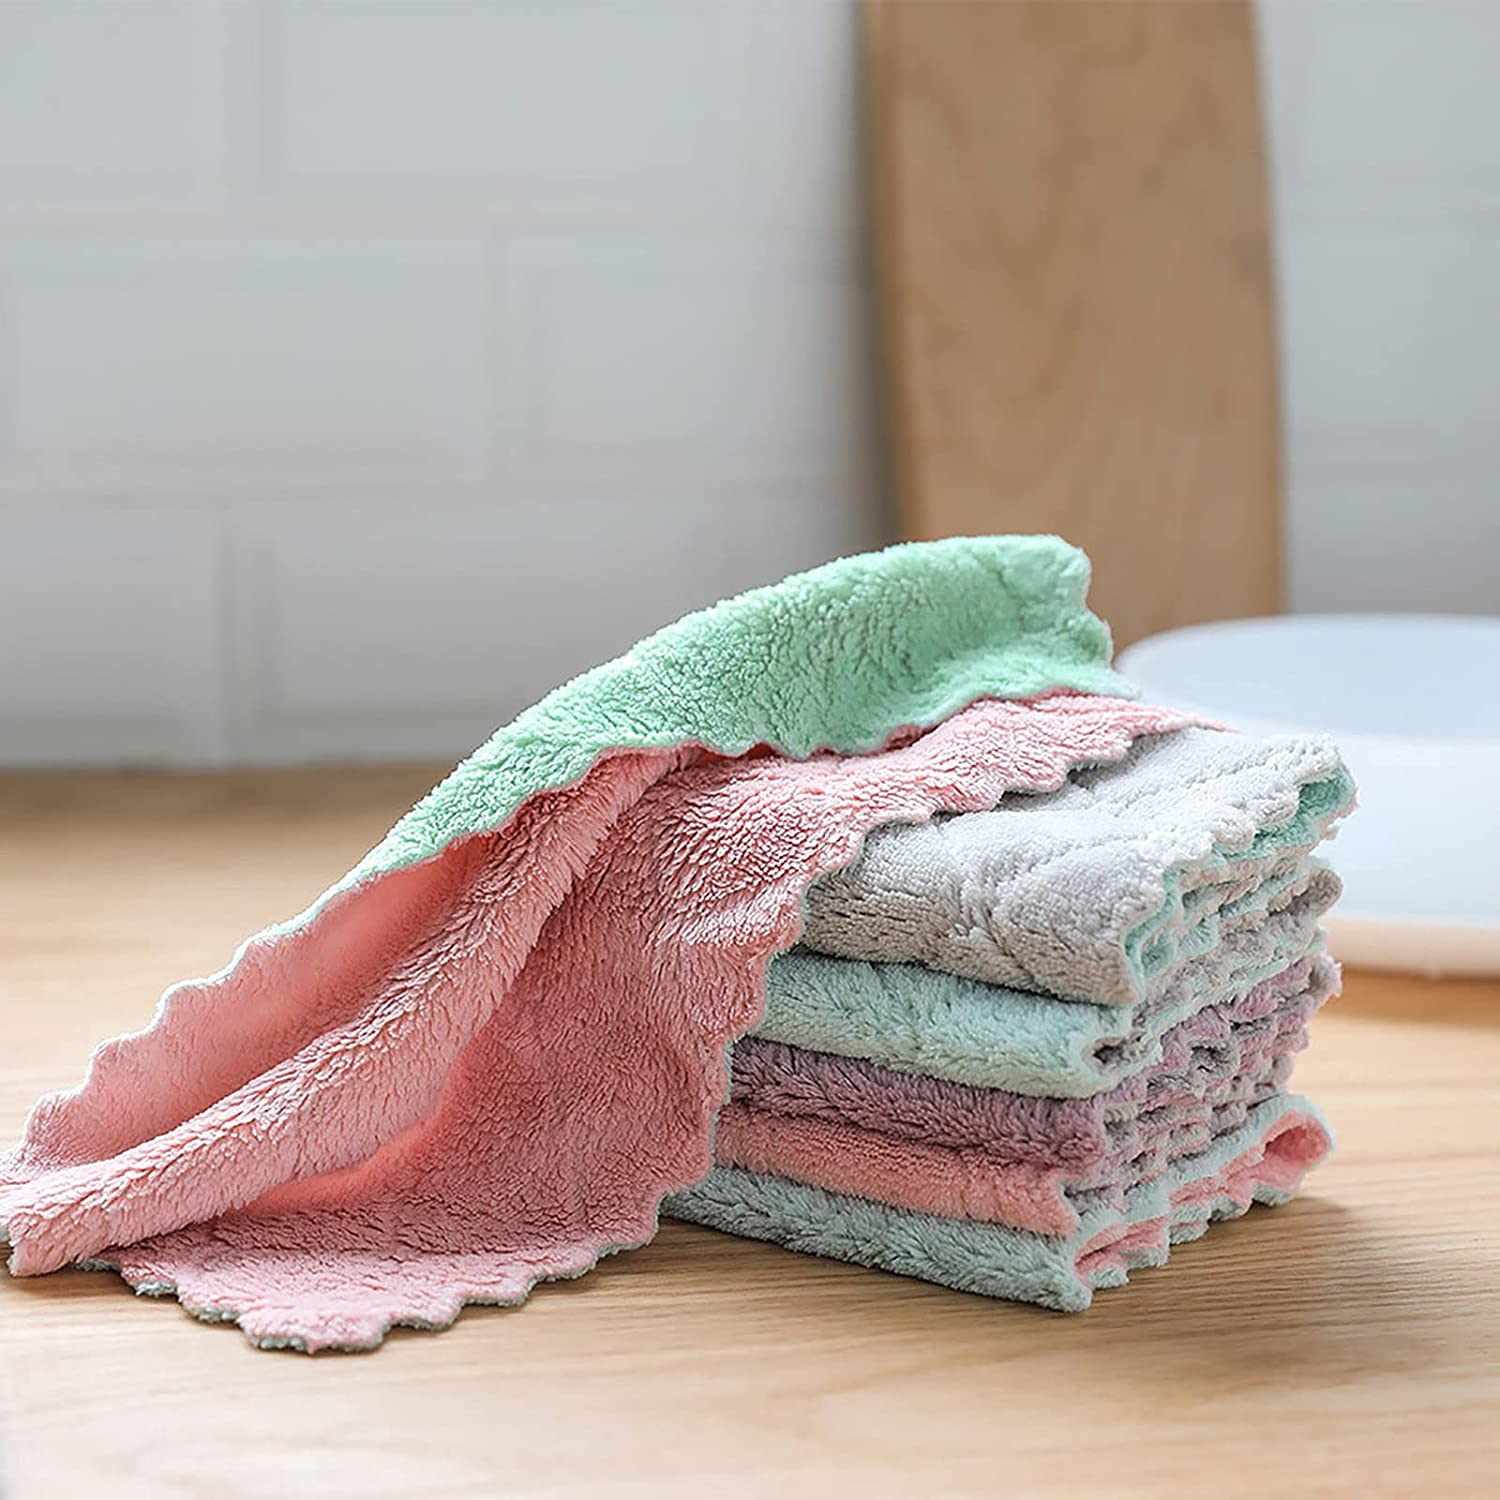 Dishwashing Towels, Lint-free Rags, Kitchen Absorbent Wipes, Table Wiping Dishes, Dish Cloths, Hand Towels, Scouring Pads, Housework Cleaning Towels